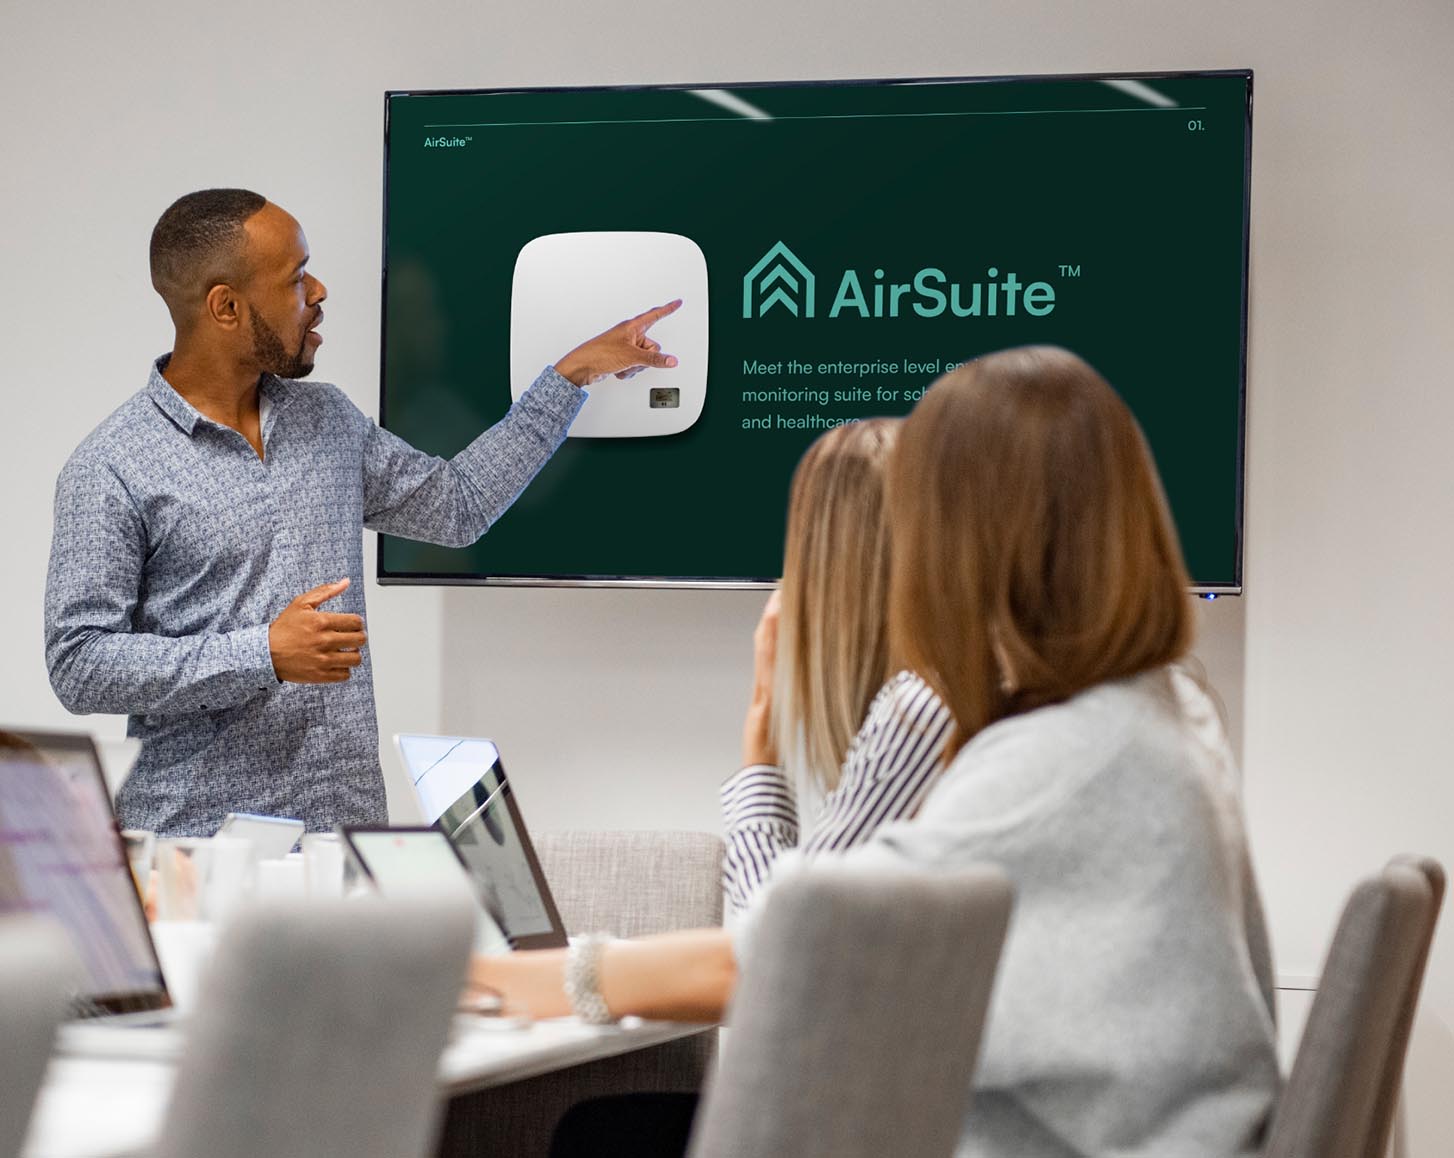 A man pointing to a TV screen and speaking to a presentation about AirSuite sensors